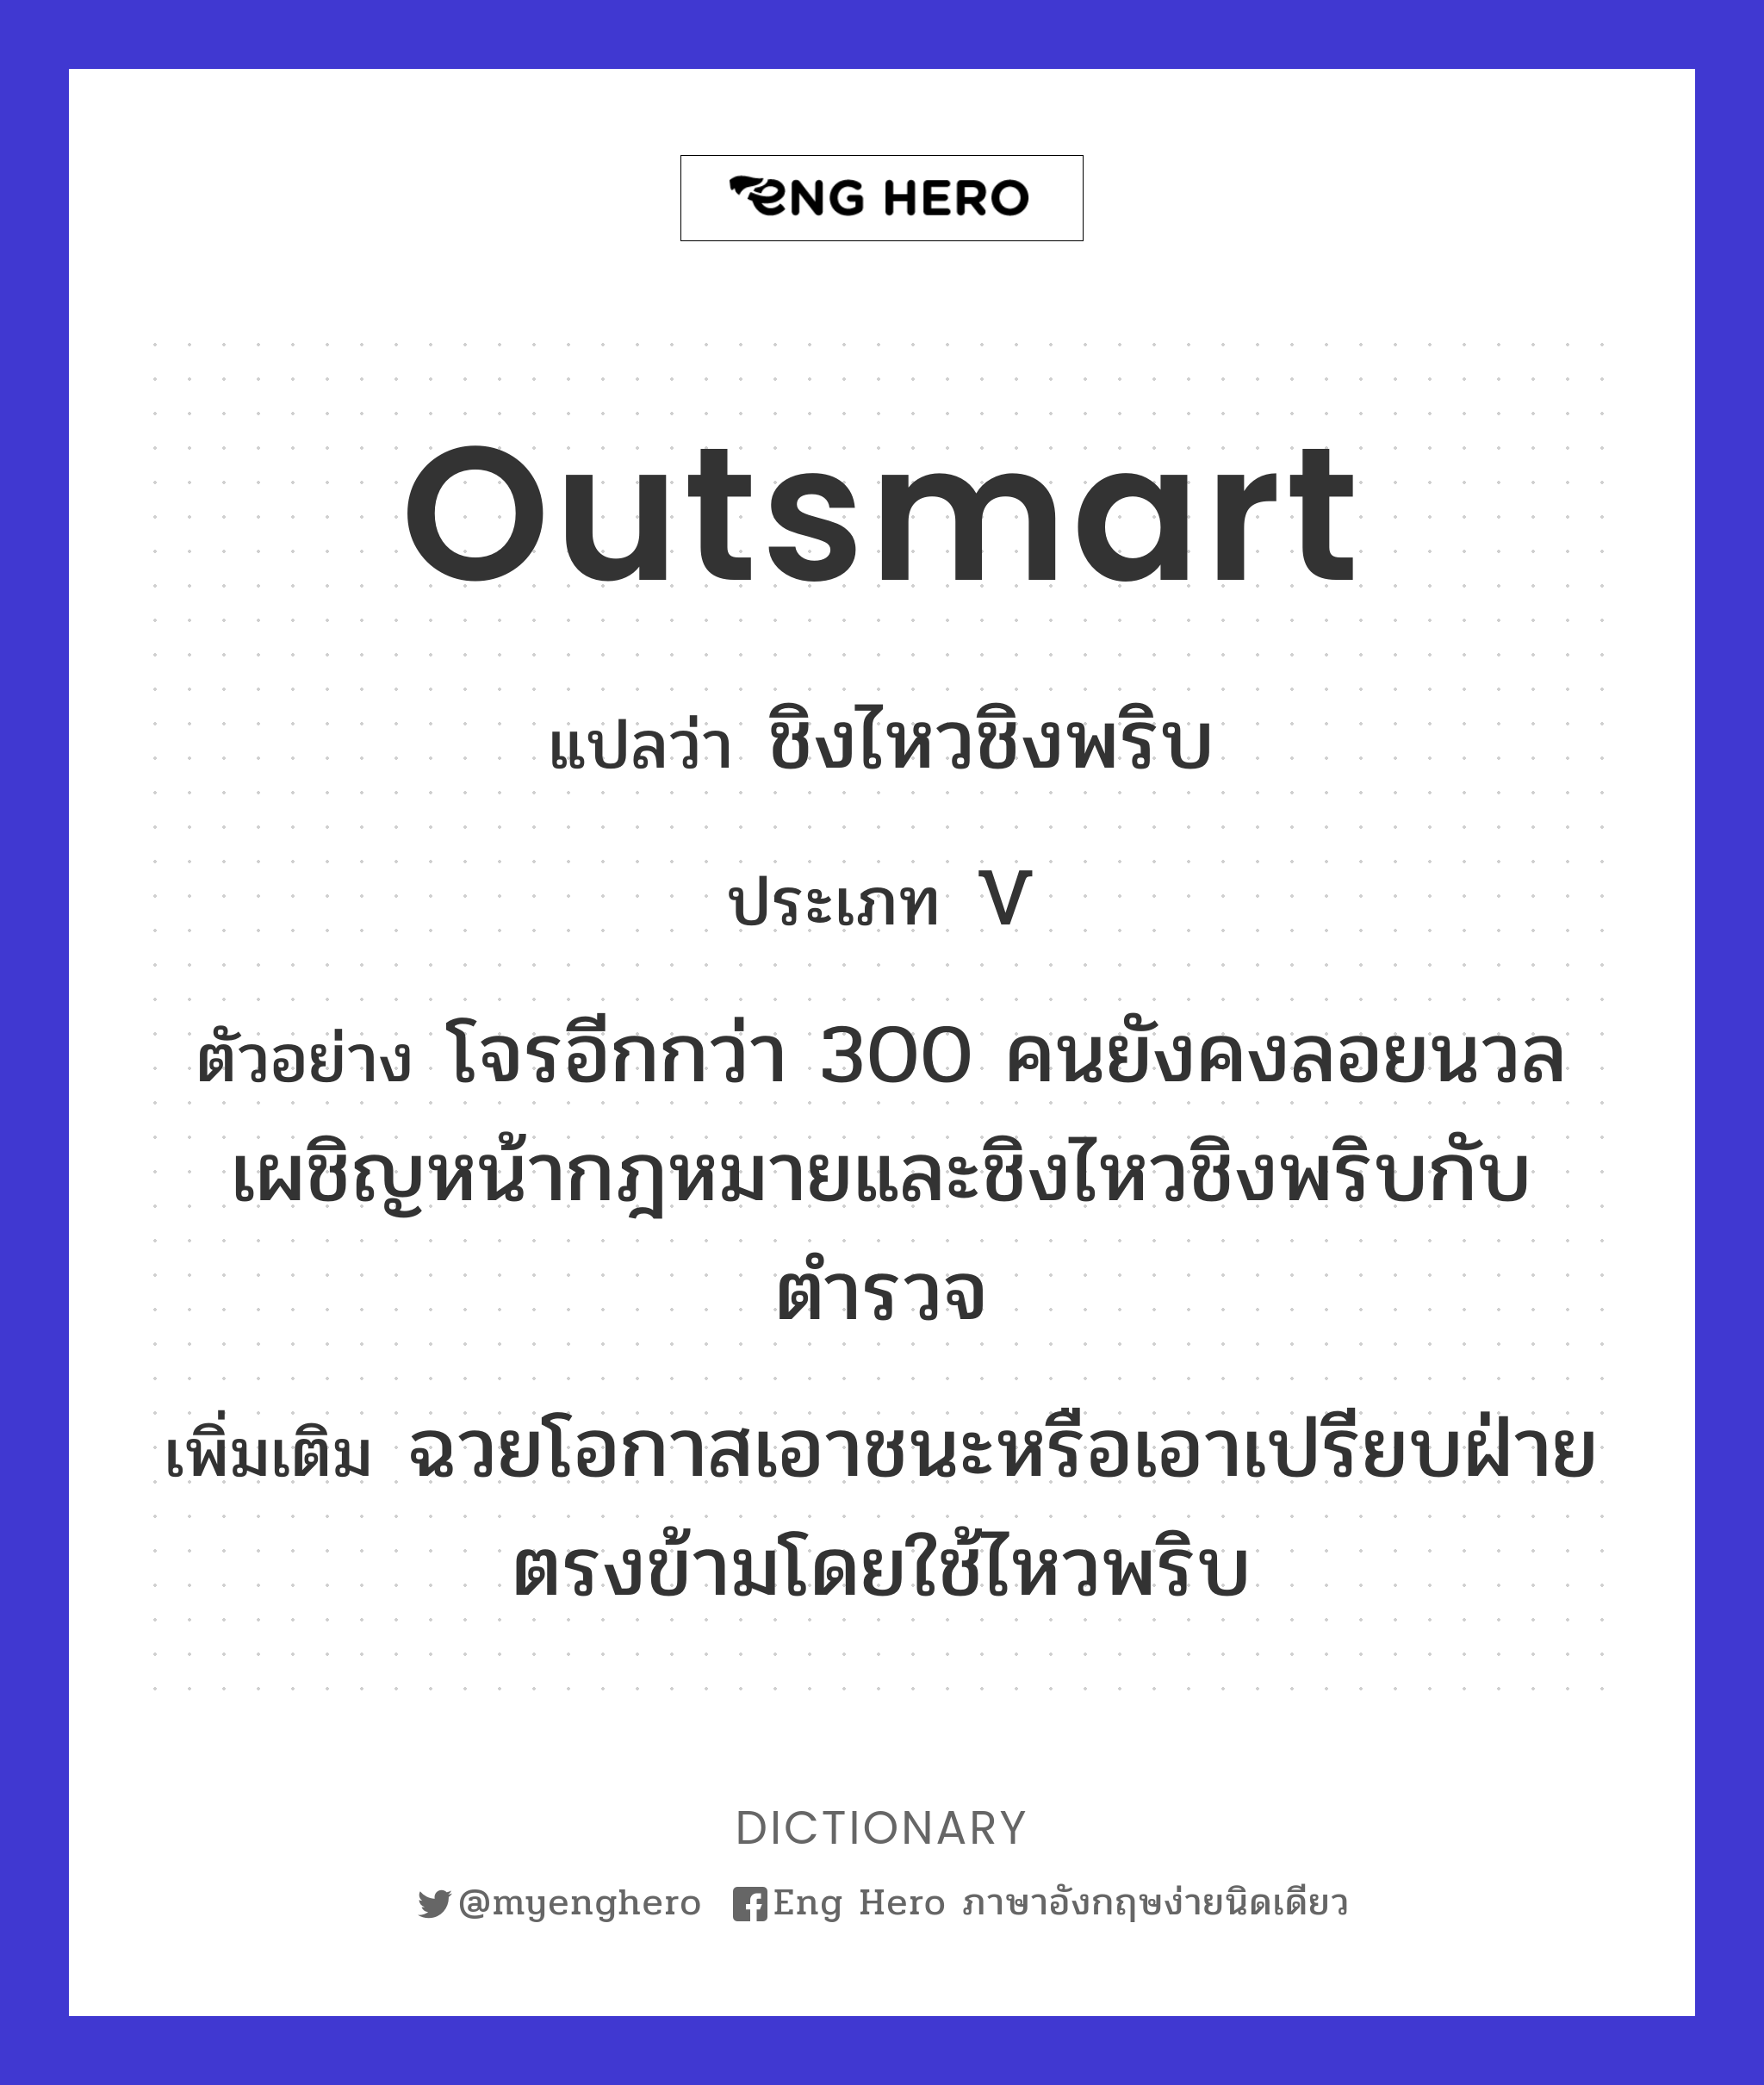 outsmart